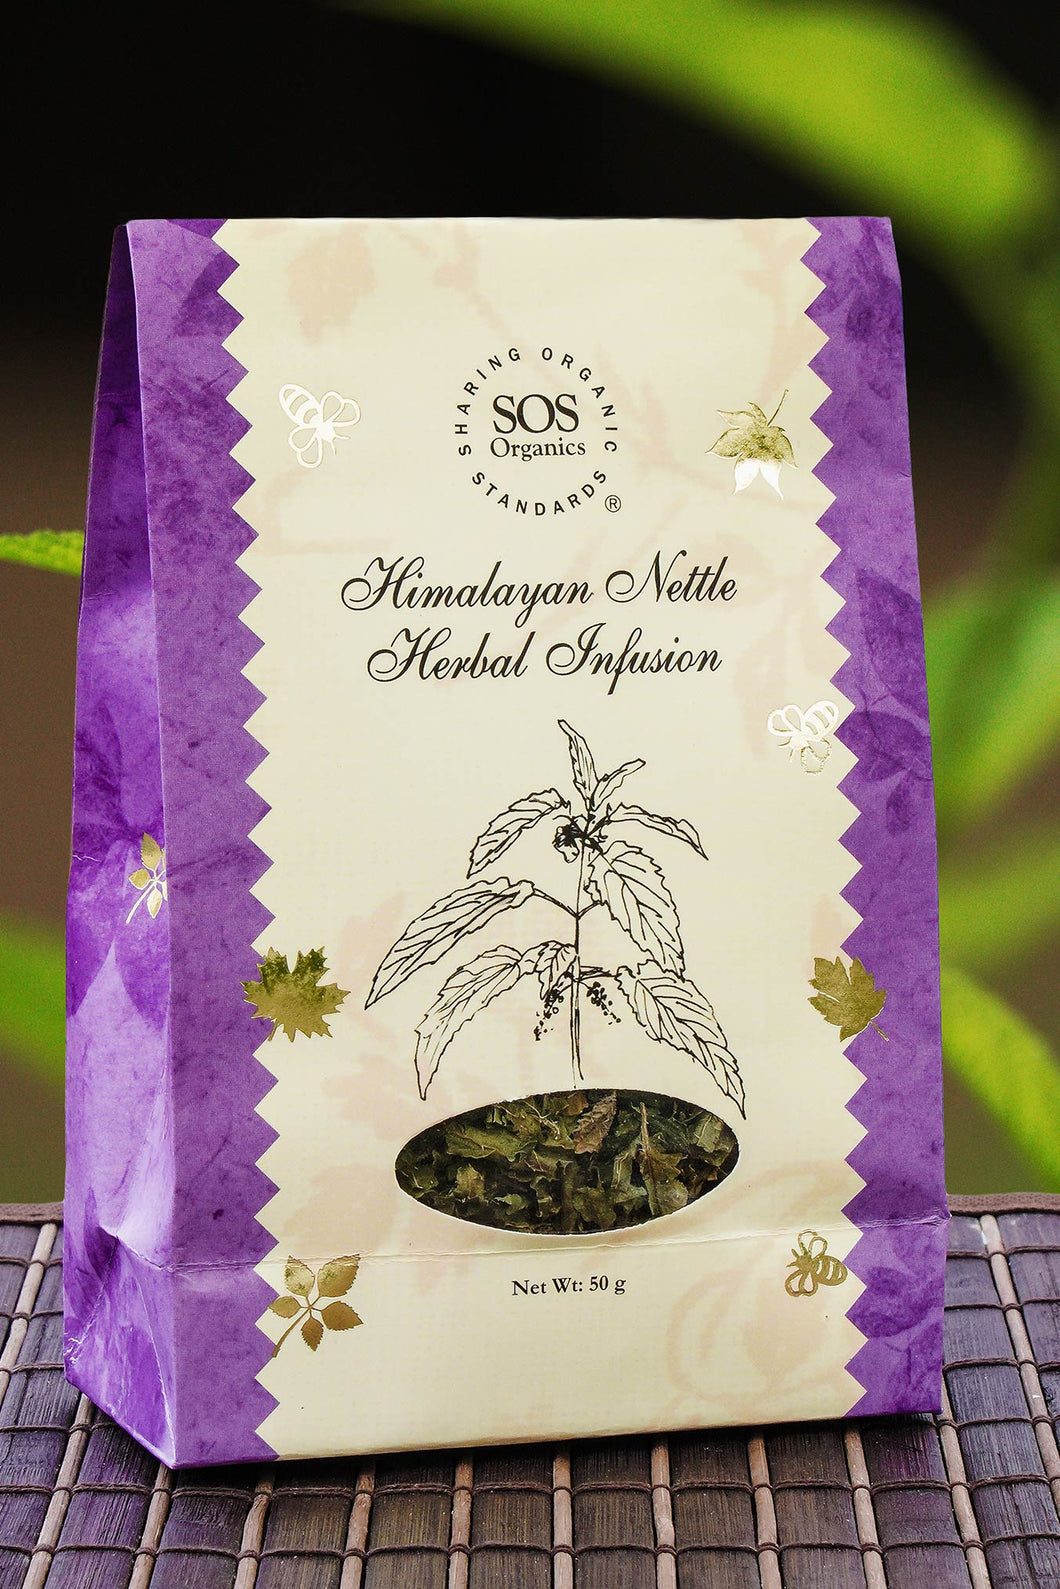 Himalayan Nettle Herbal Infusion (50g)